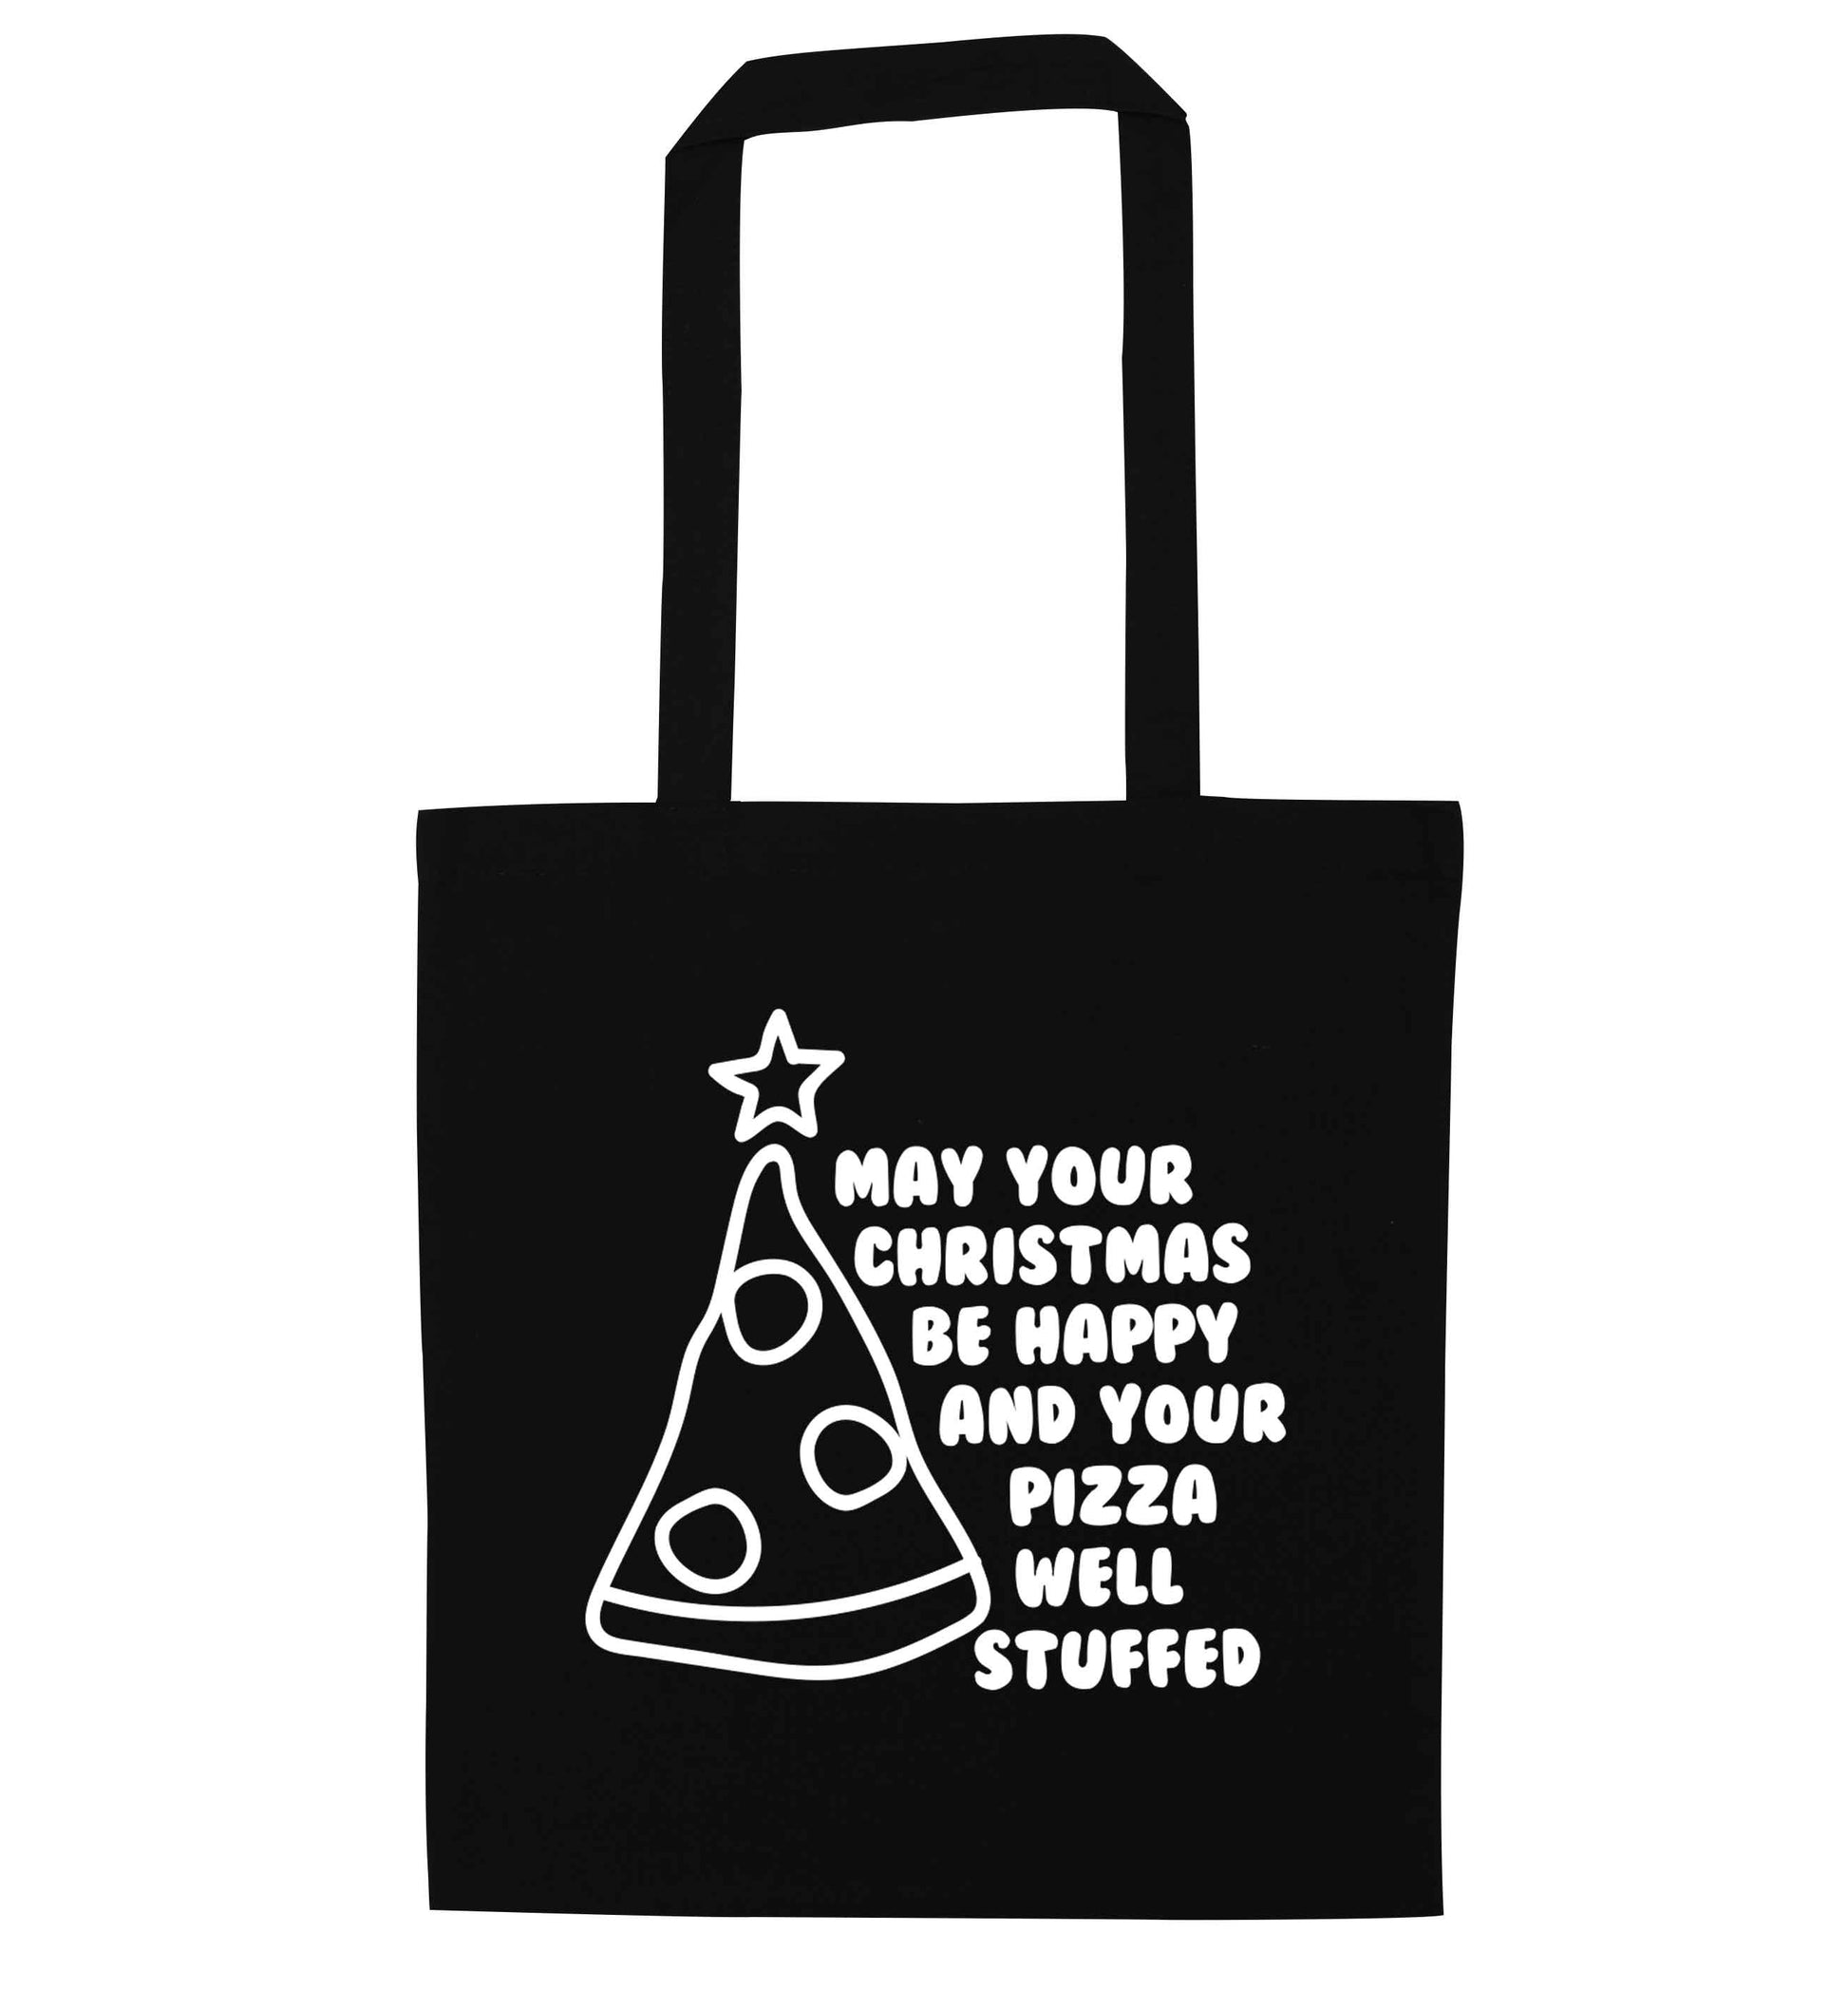 May your Christmas be happy and your pizza well stuffed black tote bag